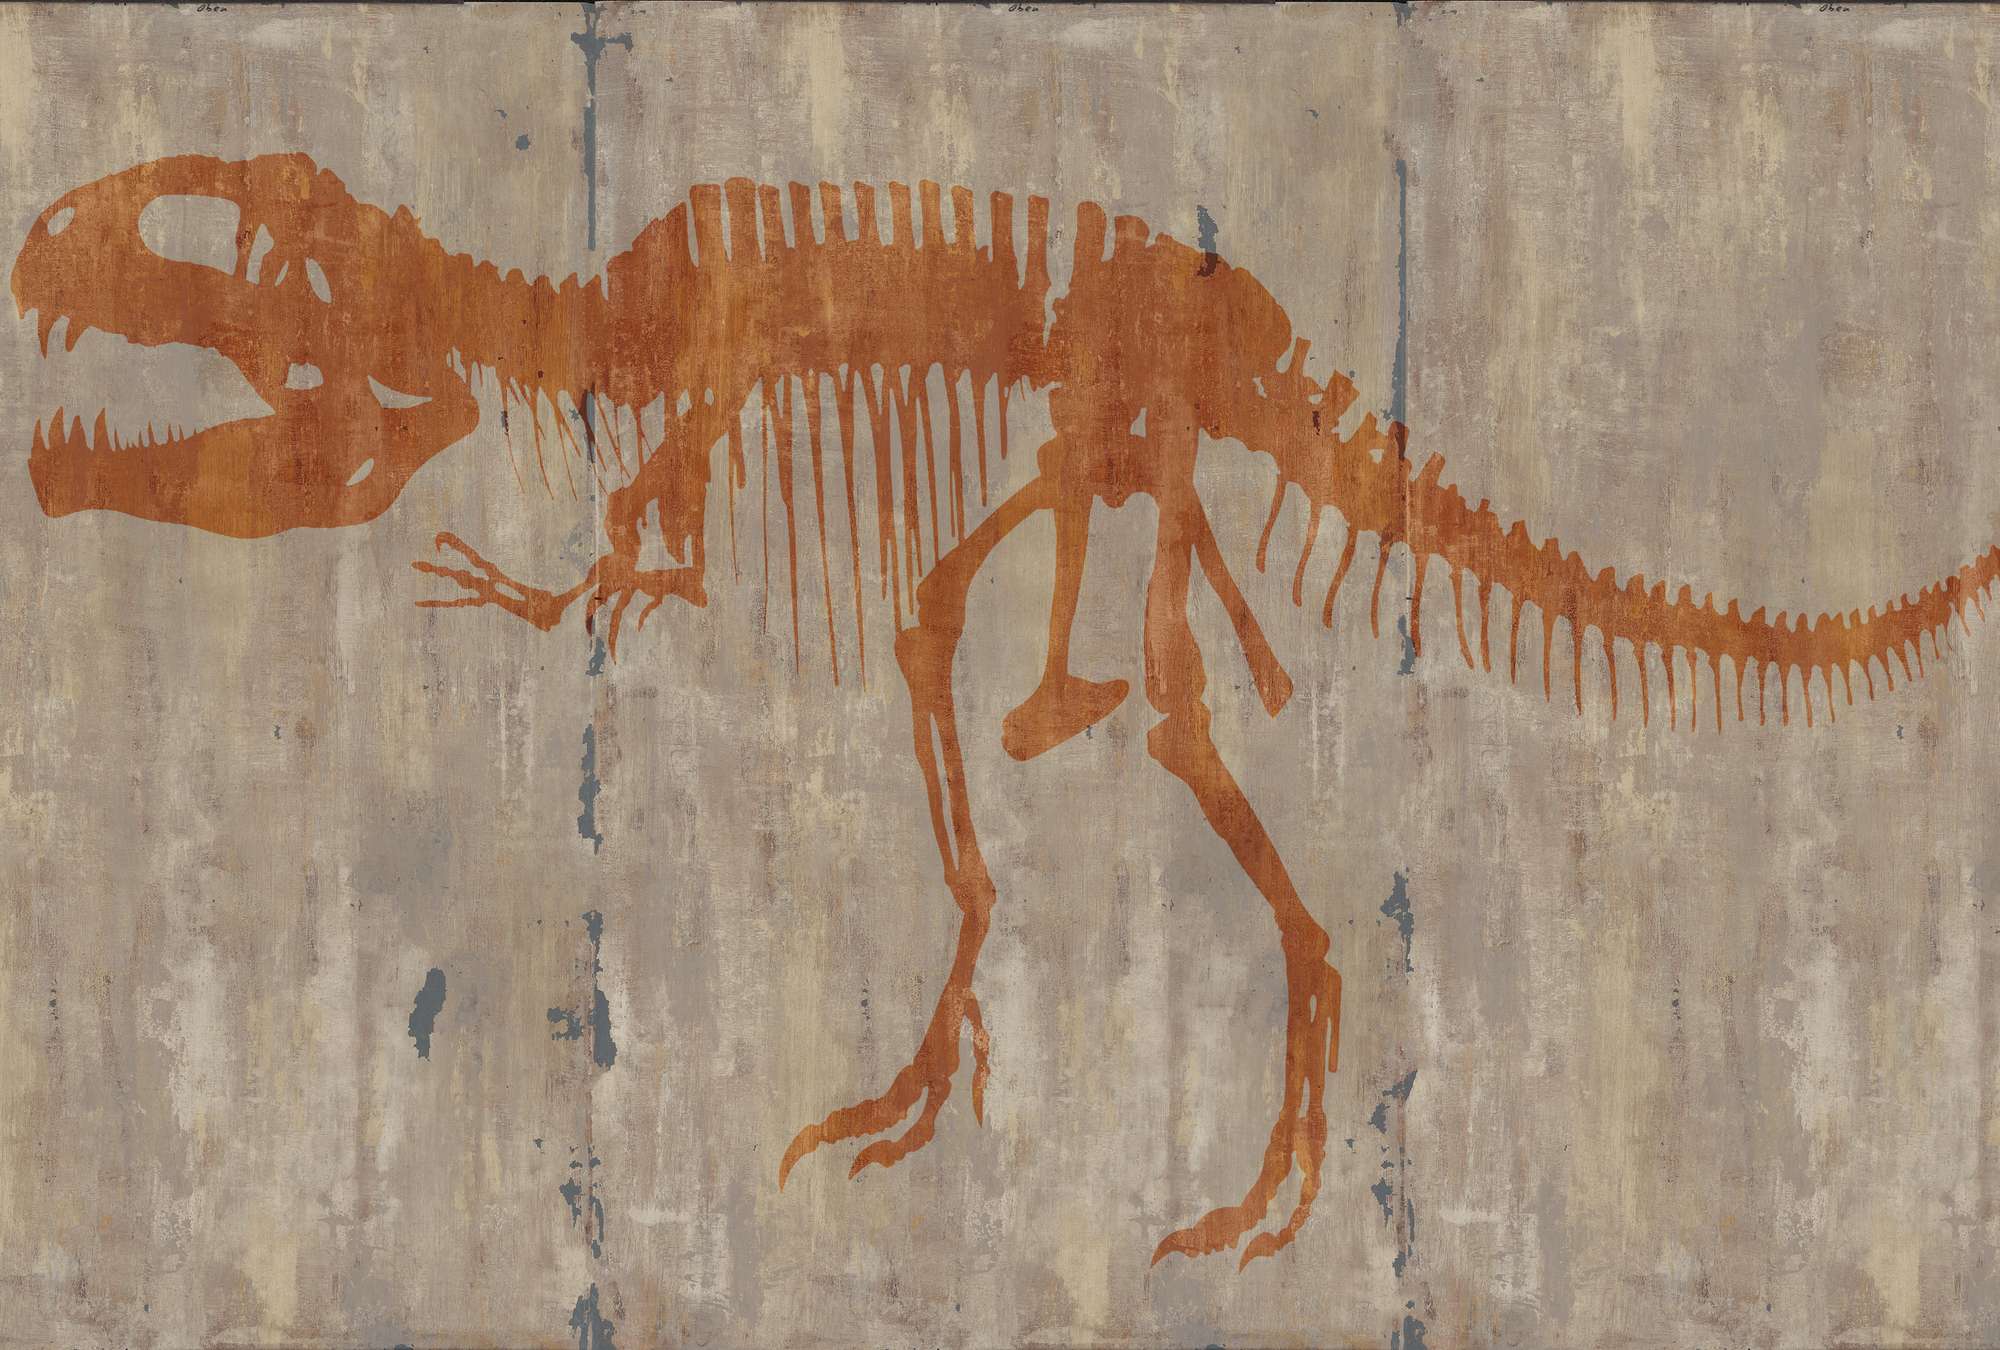             Cave painting of a T-Rex mural
        